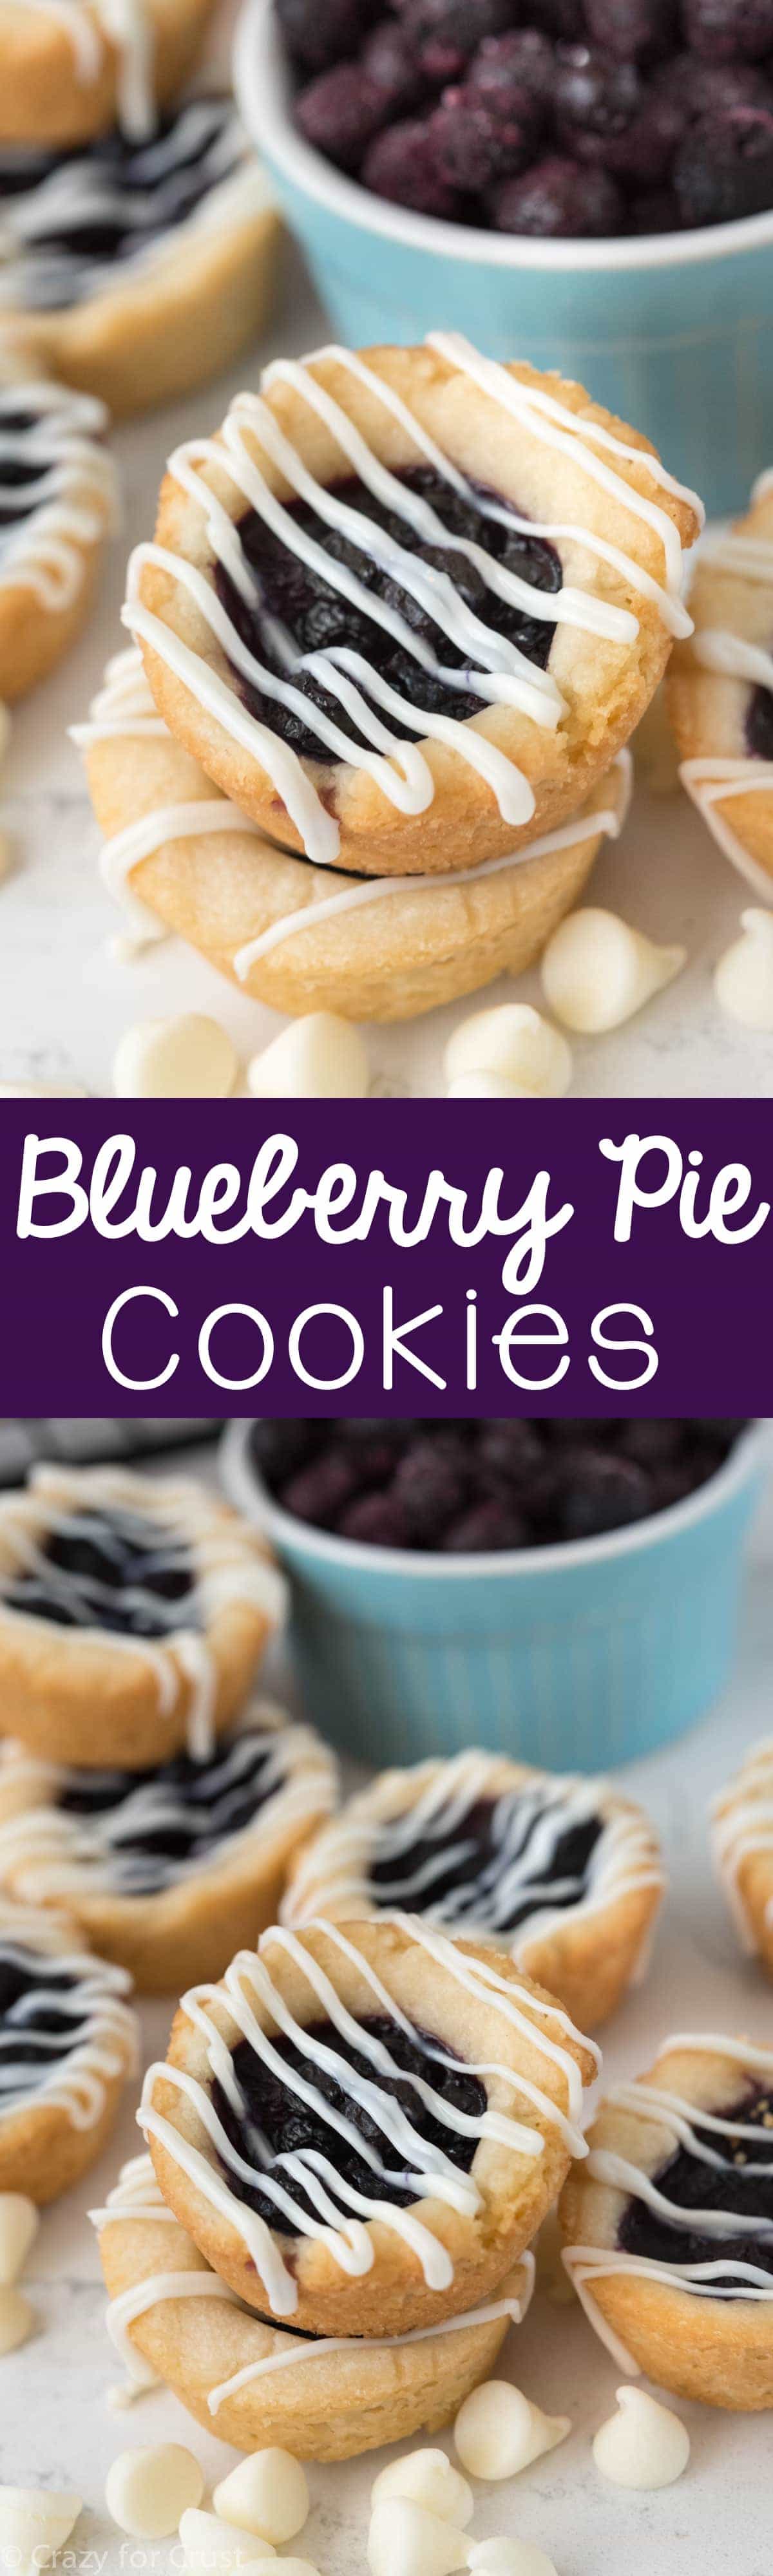 Easy Blueberry Pie Cookies - a shortbread cookie filled with blueberry pie! This recipe is foolproof and perfect for the holidays.